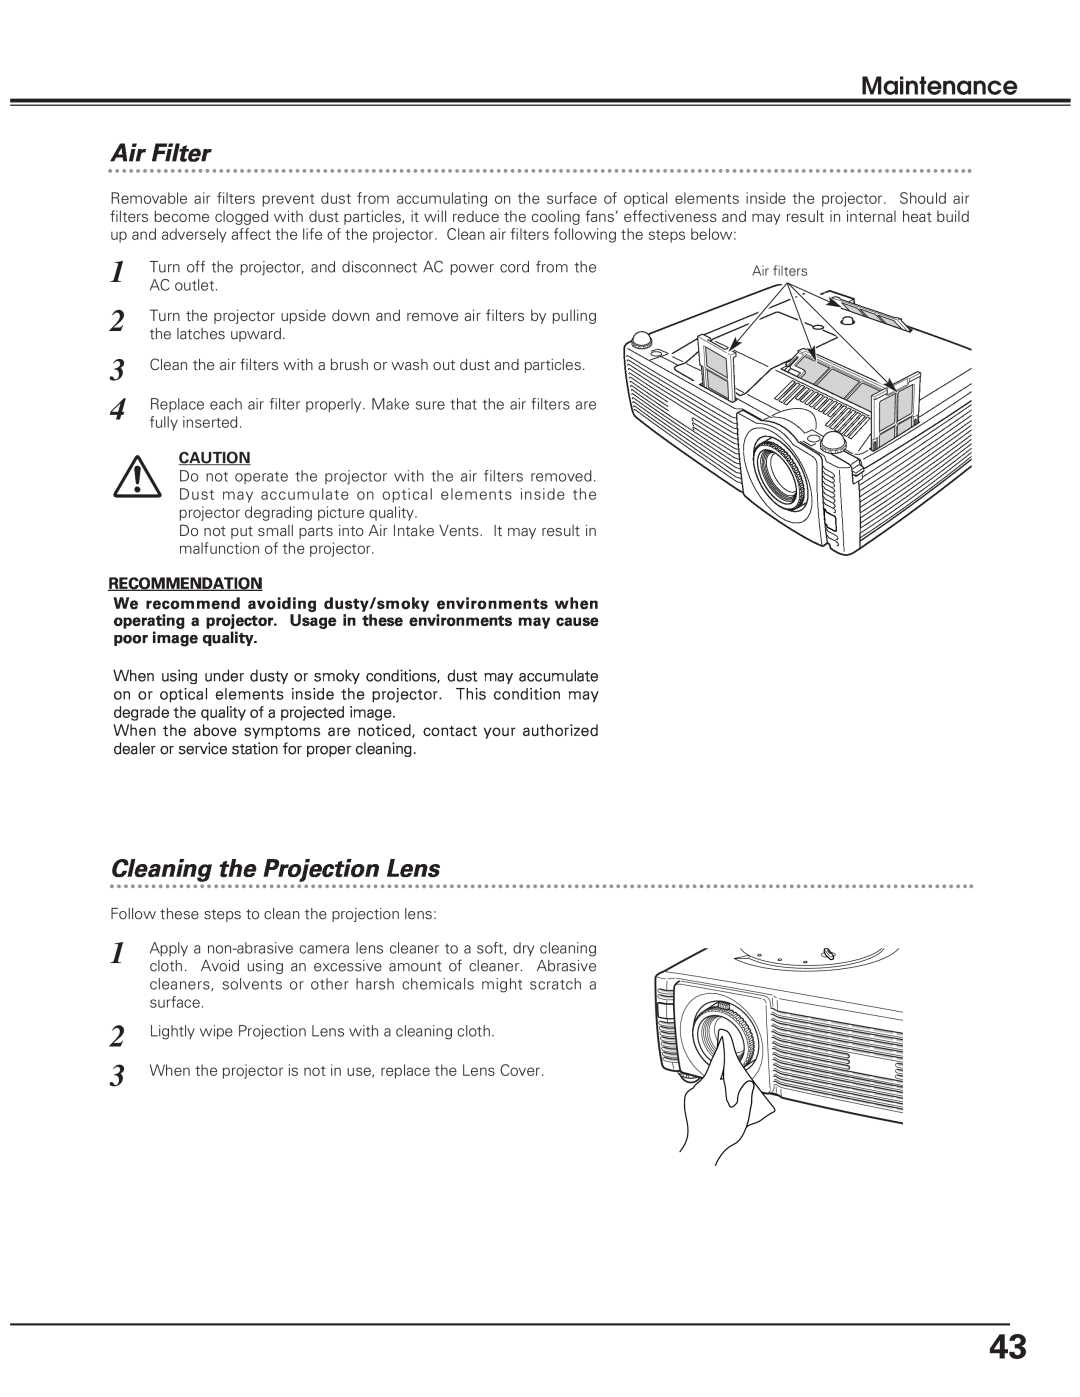 Eiki LC-SD10 owner manual Air Filter, Cleaning the Projection Lens, Maintenance, Recommendation 